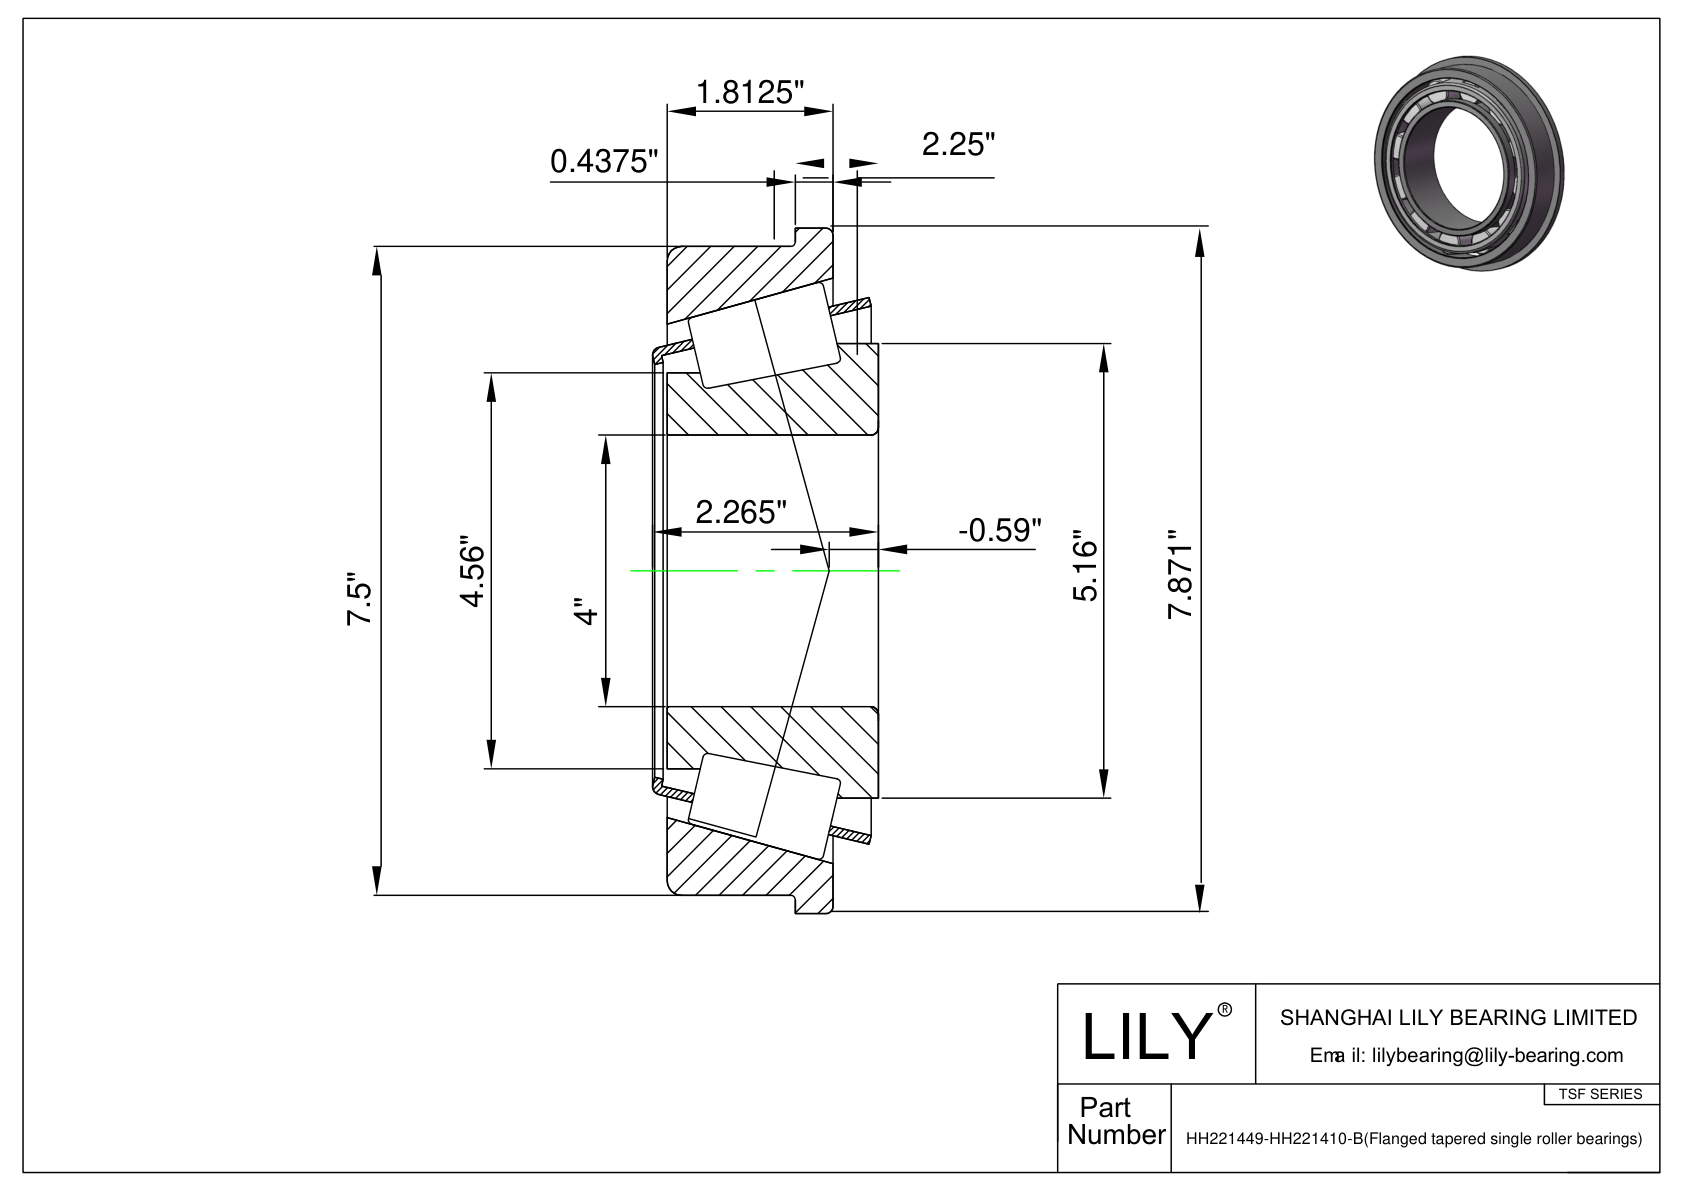 HH221449-HH221410-B TSF (Tapered Single Roller Bearings with Flange) (Imperial) cad drawing